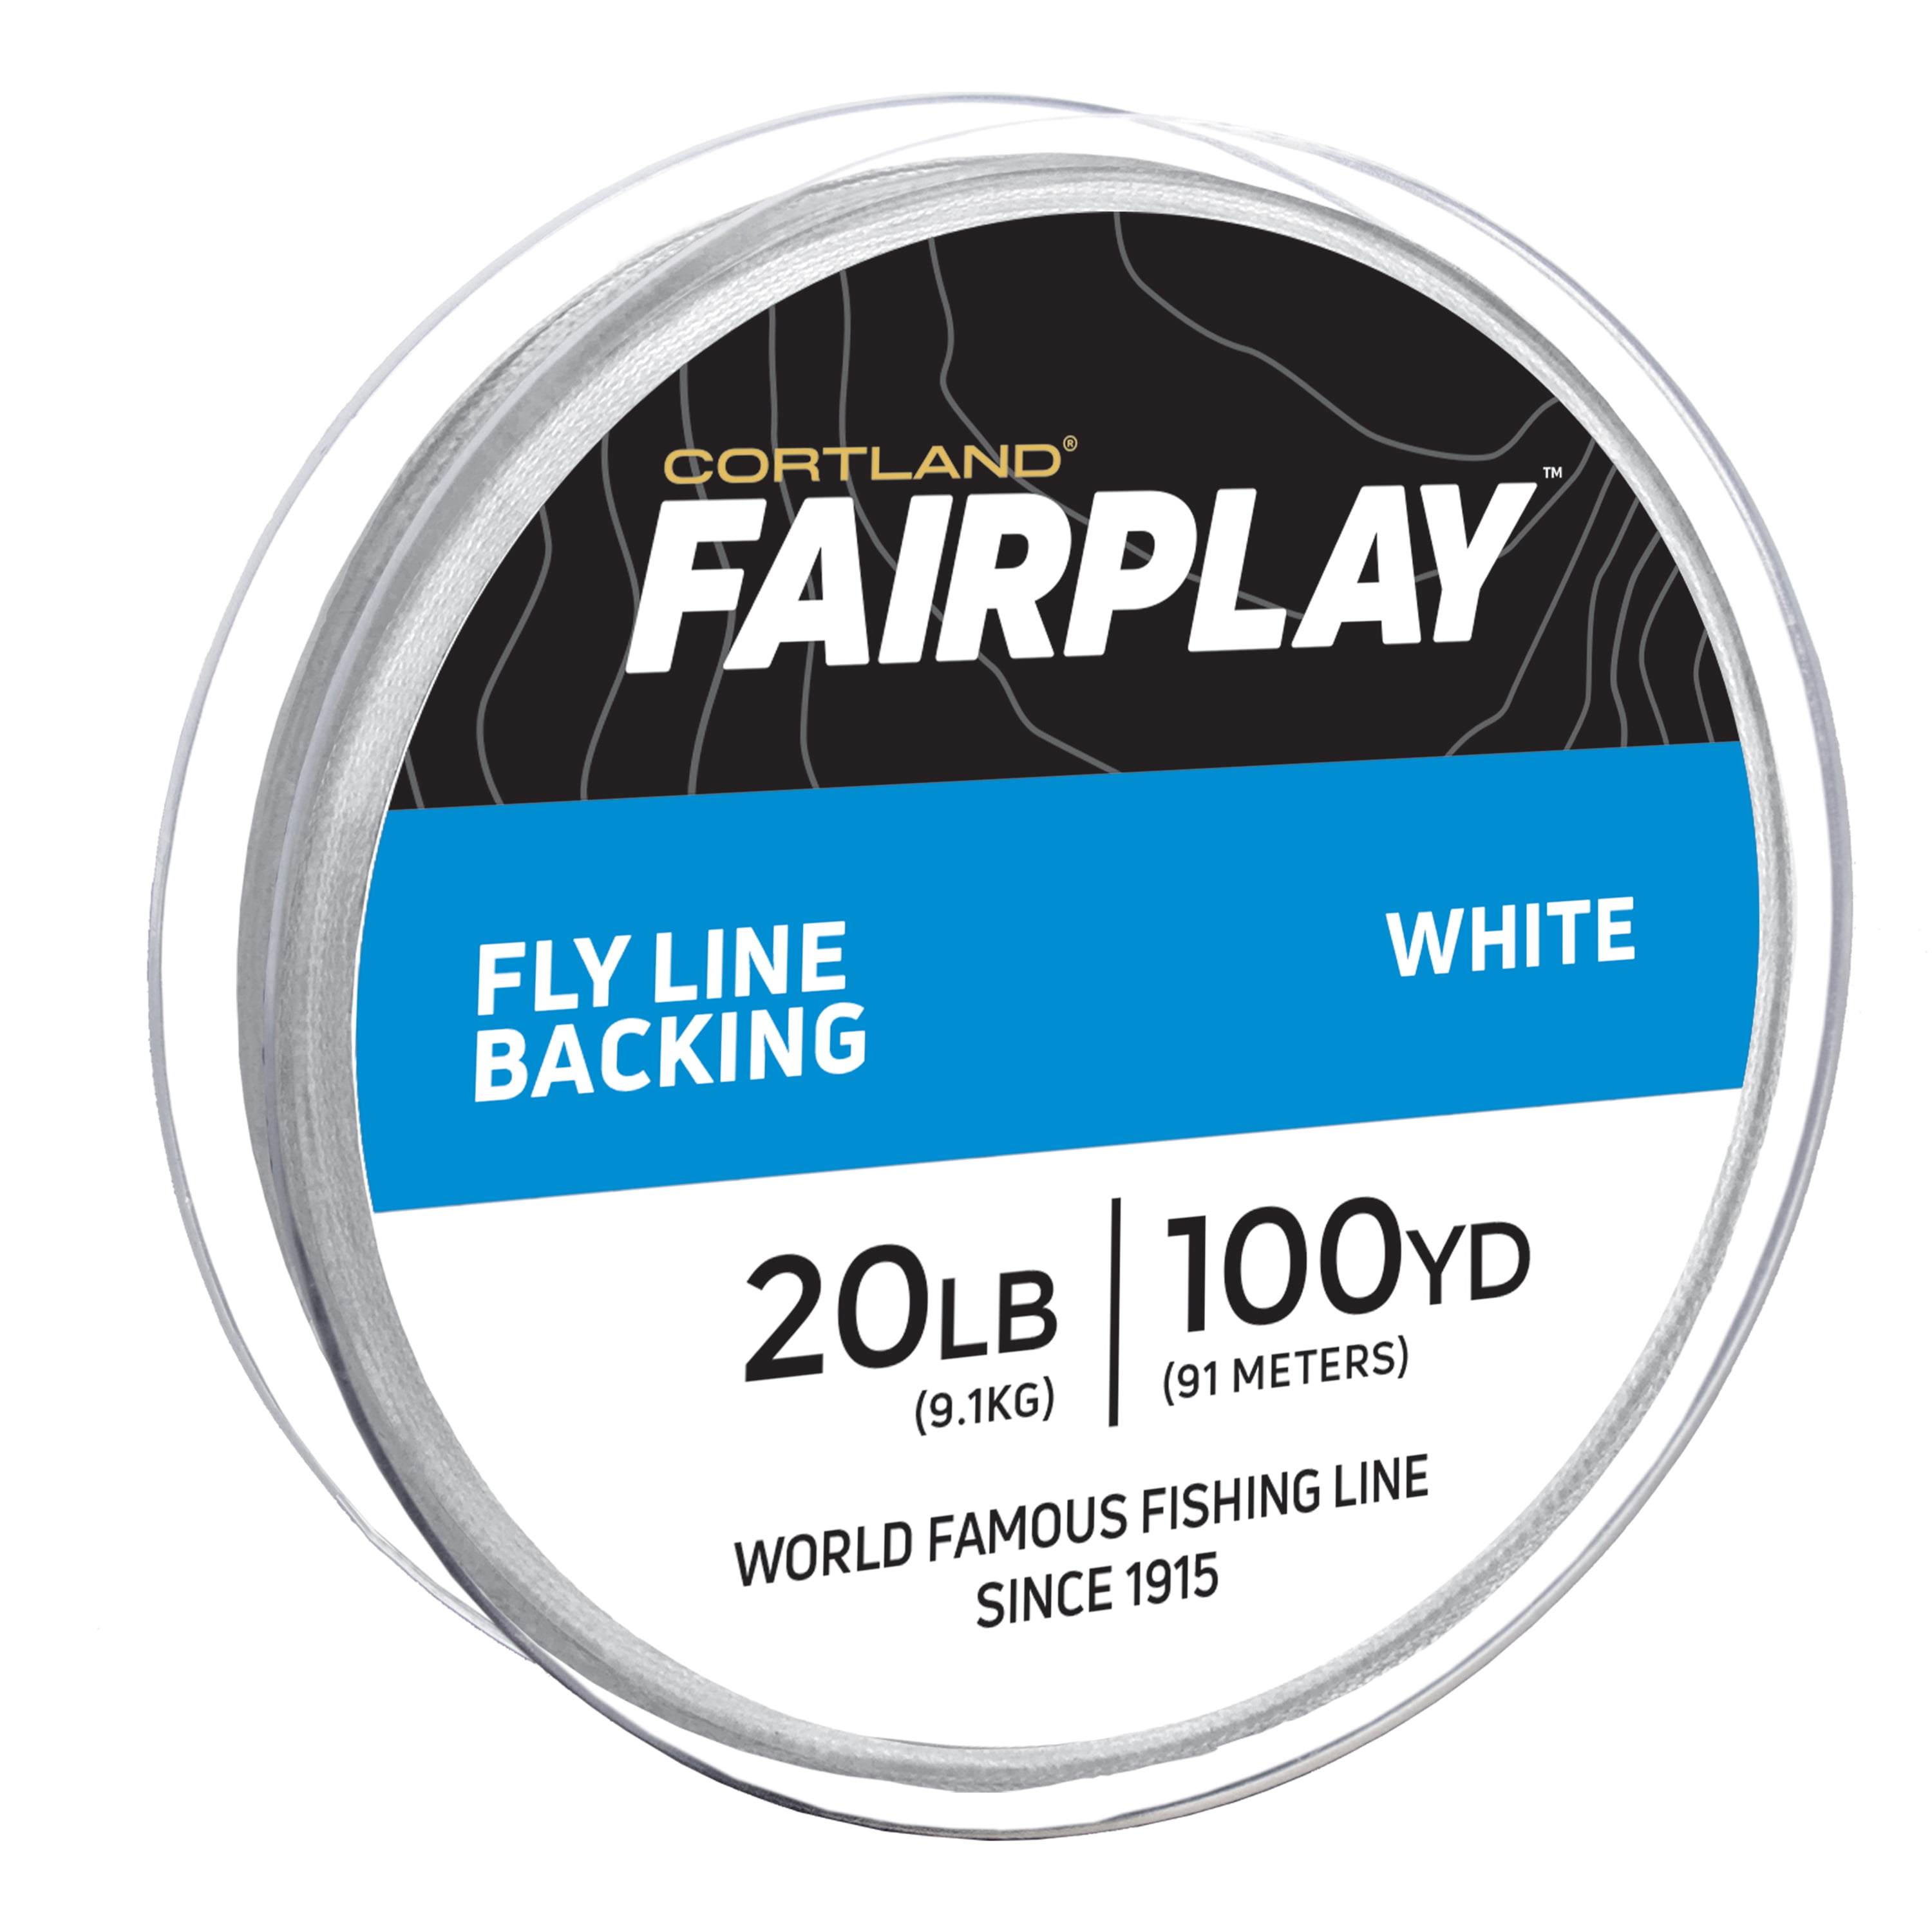 Cortland Fairplay Fly Line Reel Backing, White, 20 lb., 100 yd